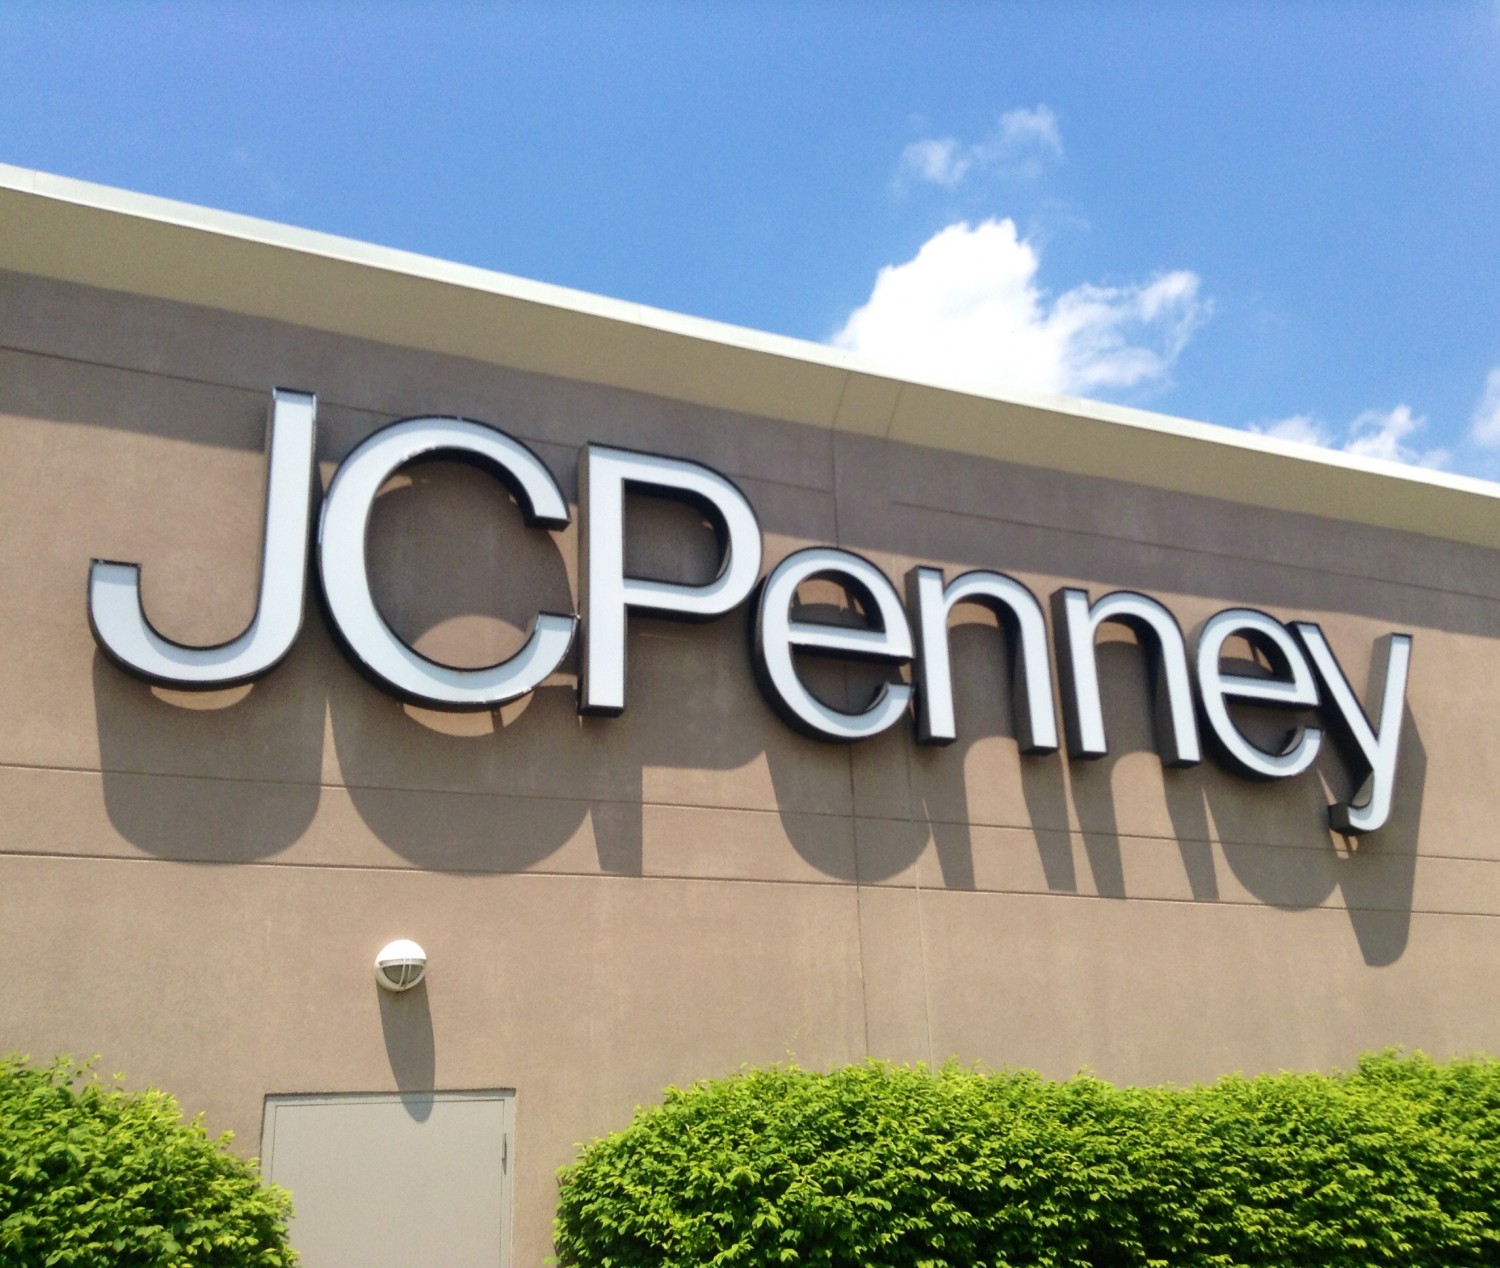 jcpenney-is-offering-500-off-500-coupons-in-stores-dwym